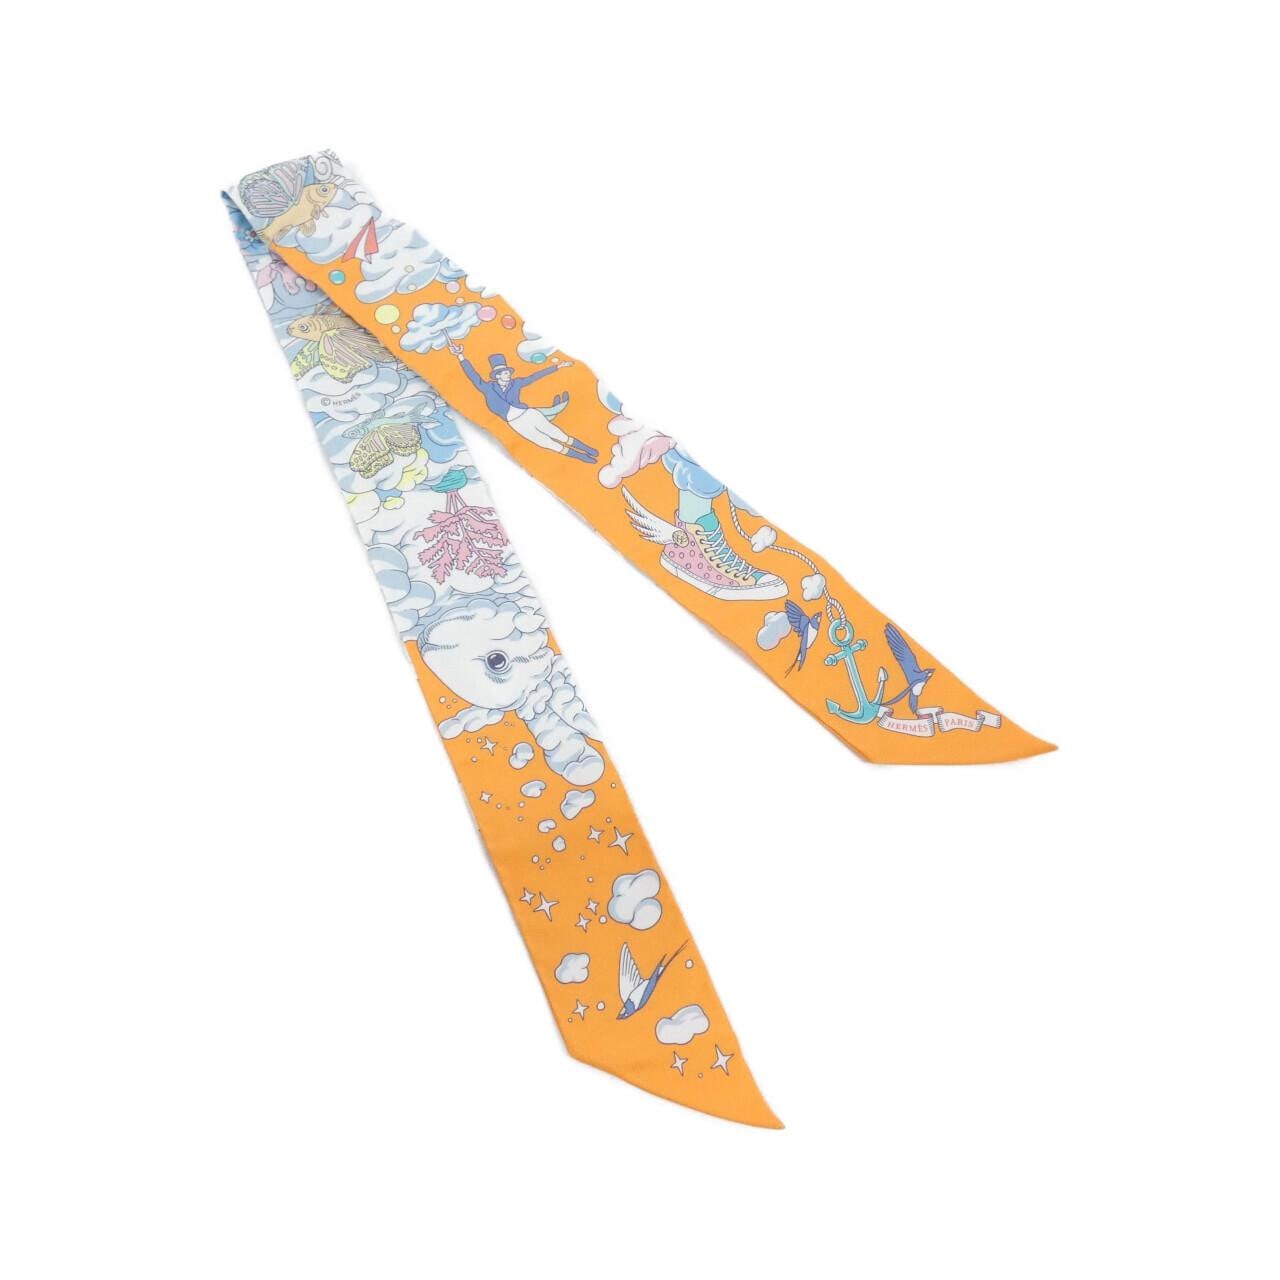 HERMES SUR MON NUAGE Twilly 063900S Scarf